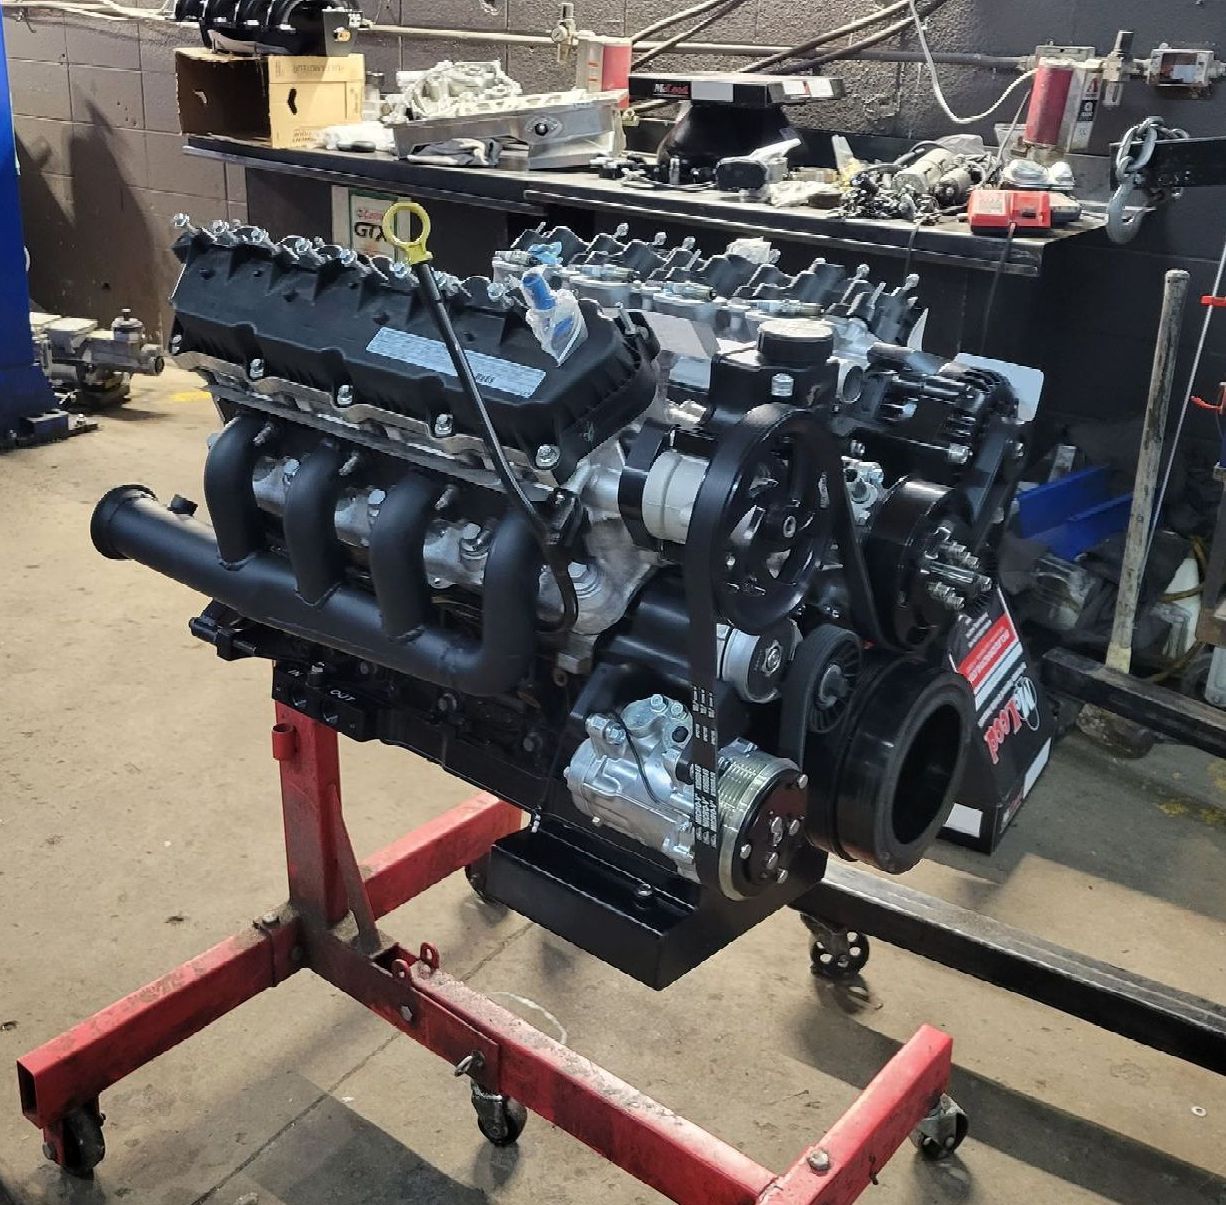 7.3L Godzilla Ford Engine prepped for a swap into 67 Mustang with indy power products Front oil pump Conversion kit 